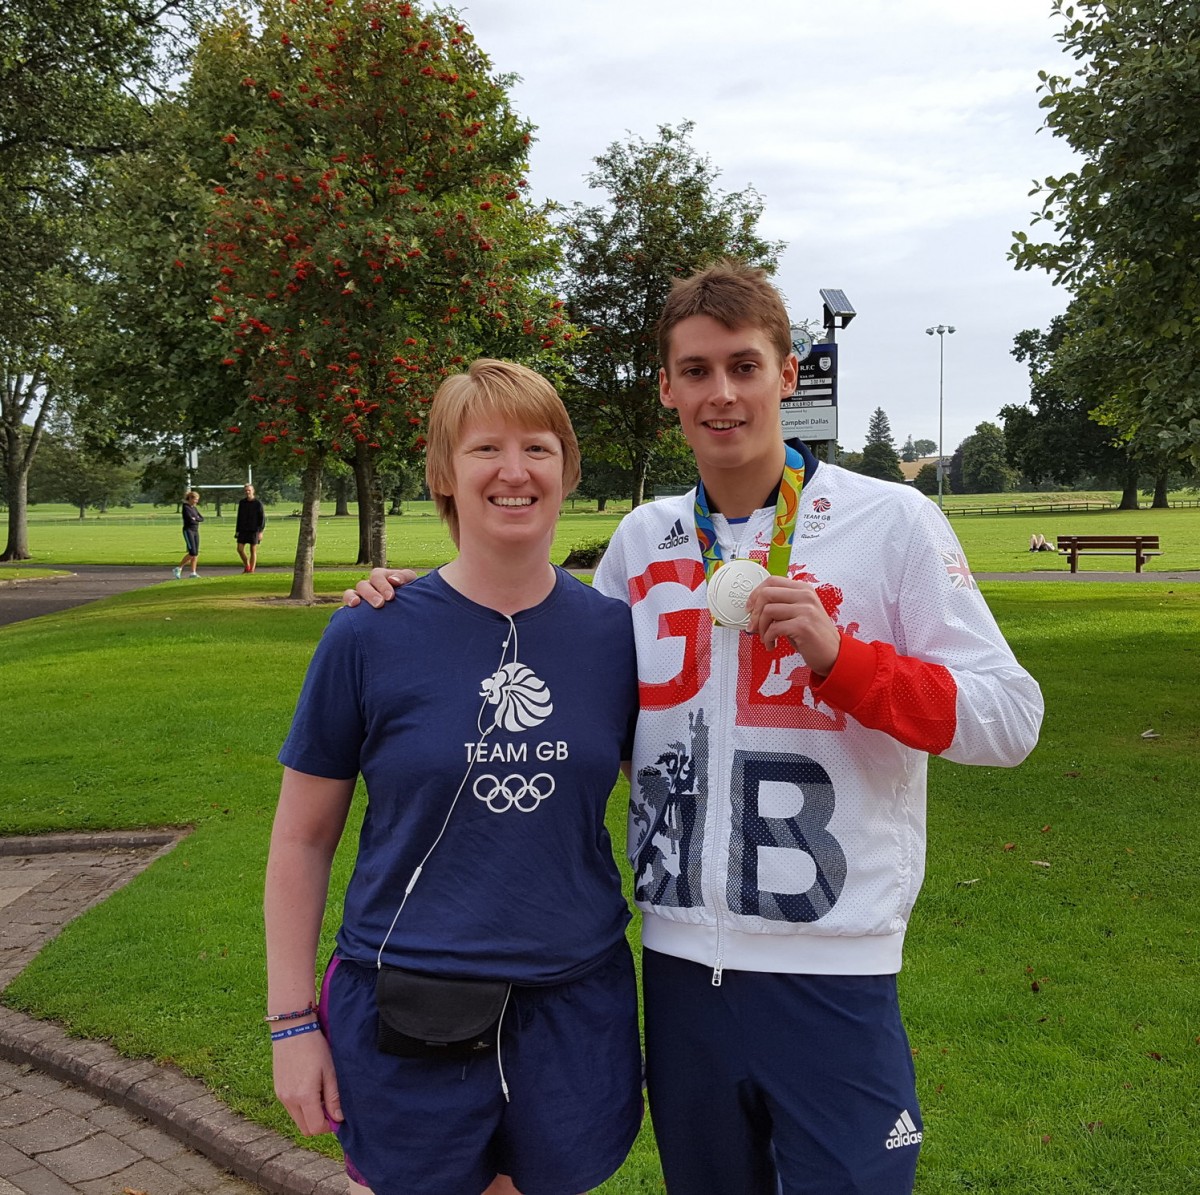 This year saw a local Perth boy named Stephen Milne bag a Silver Medal at the Rio Olympics!! We were bursting with pride! Stephen success wouldnt have been possible without the Talented Athlete Scheme at Live Active Leisure.